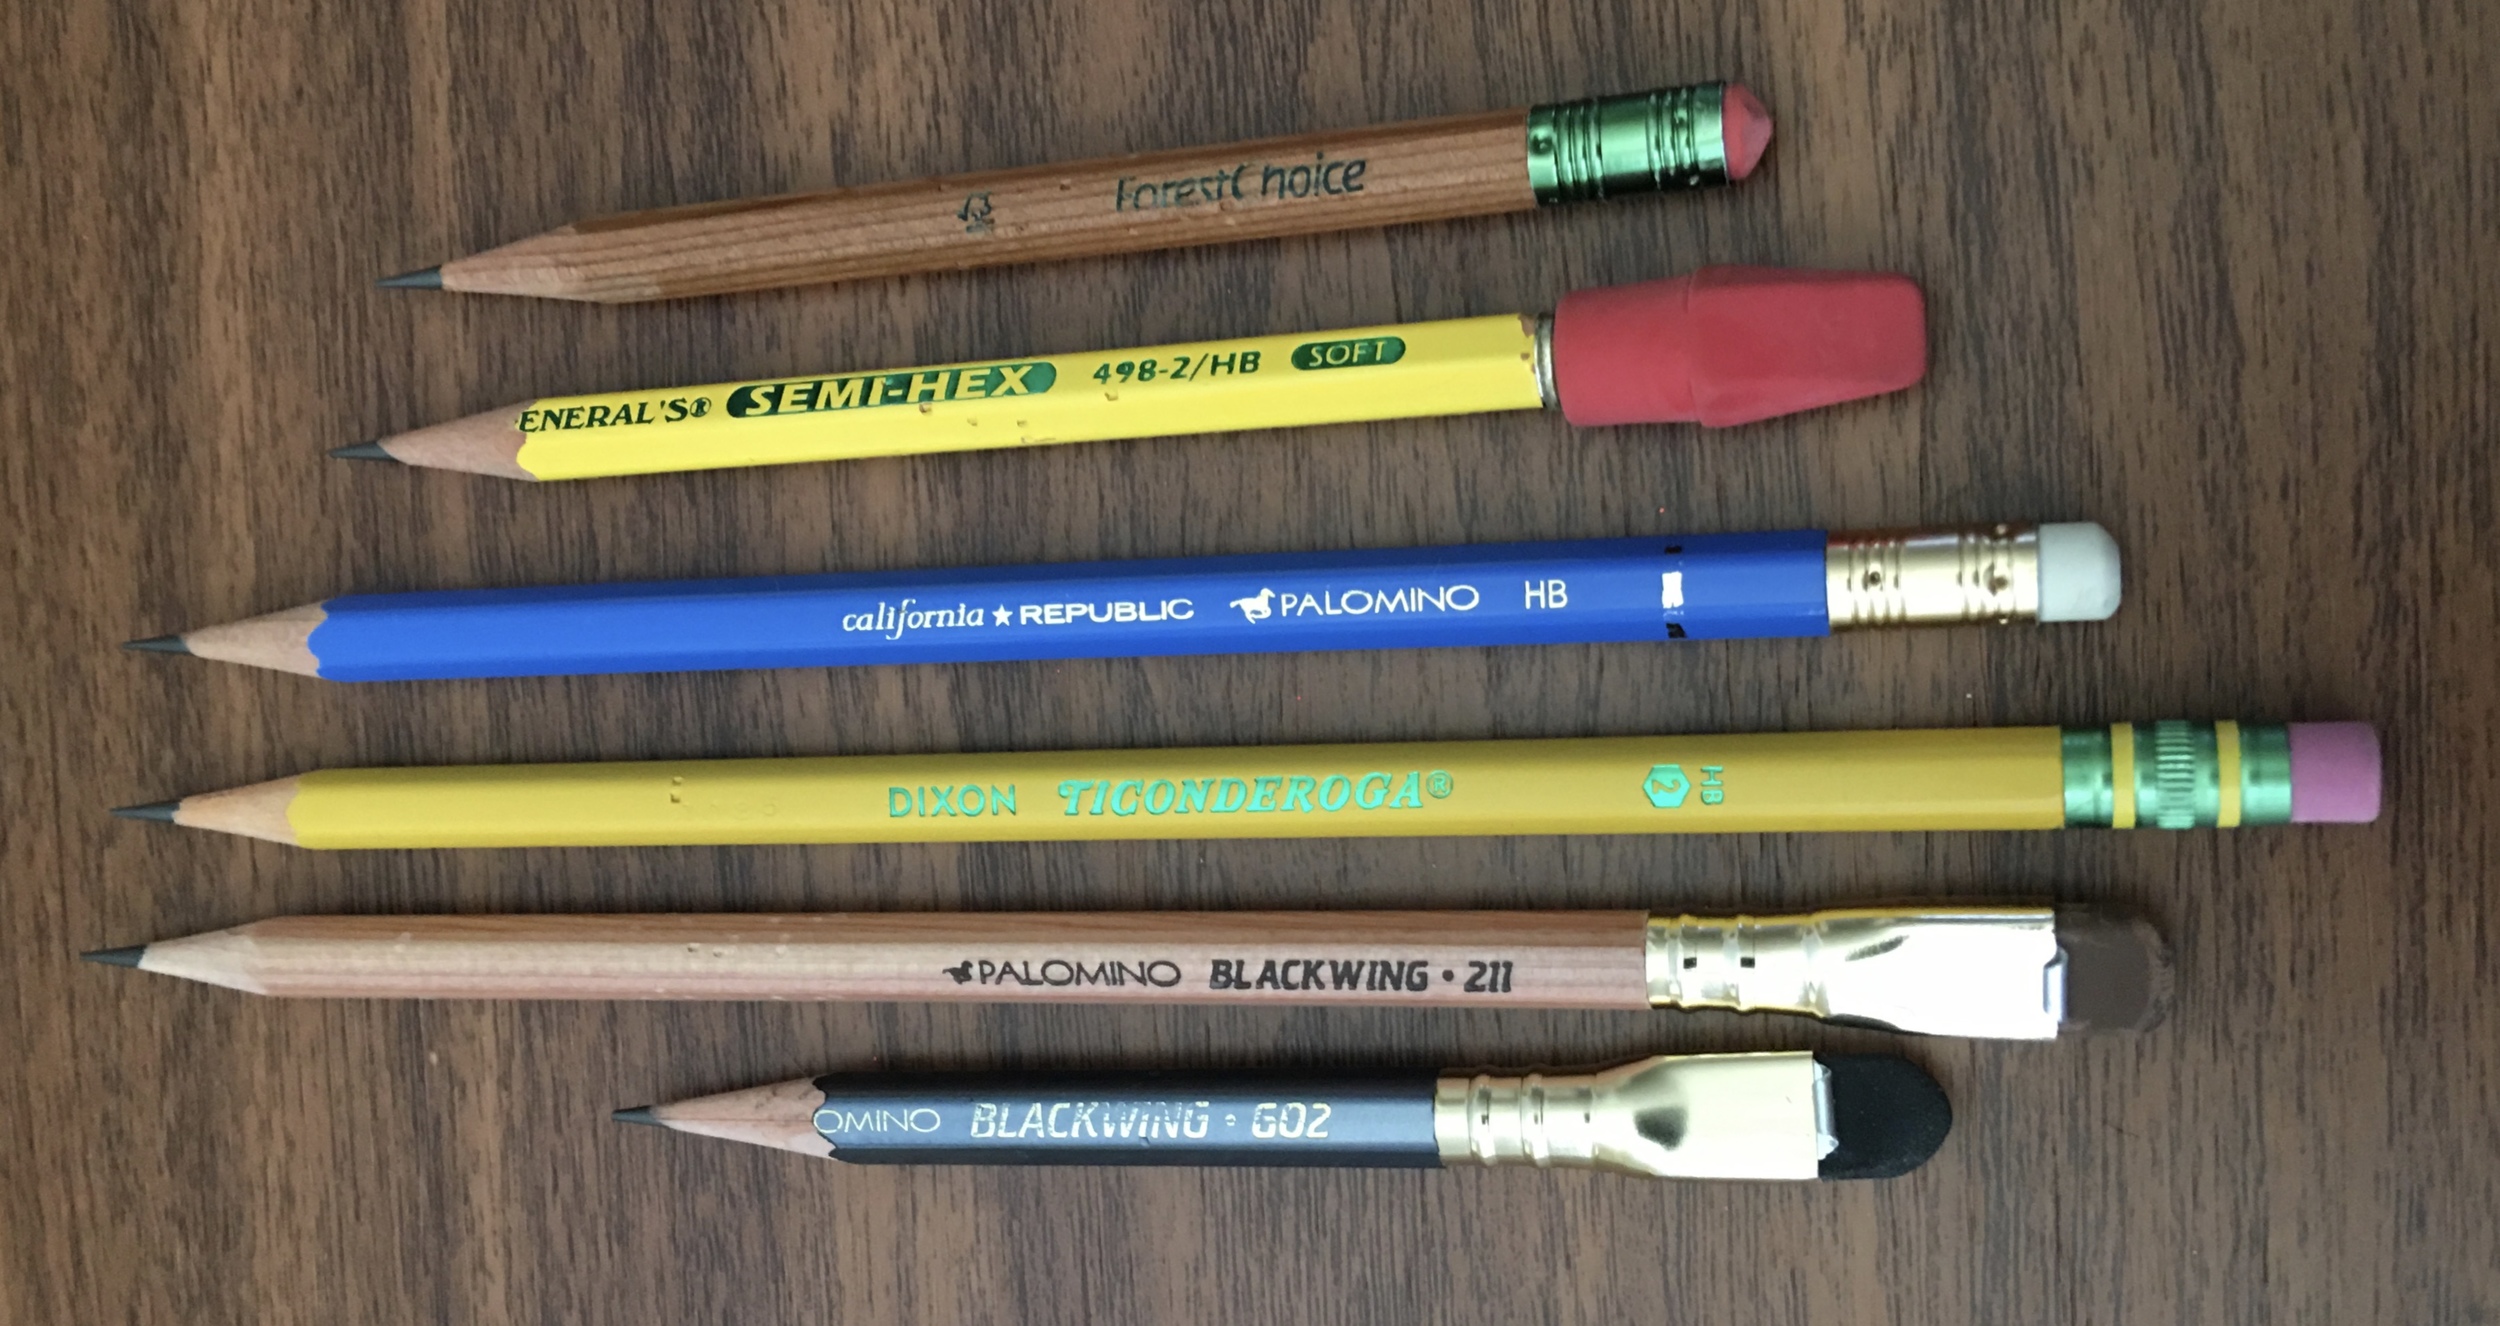 My Five Best Pencils for EveryDay Writing — The Gentleman Stationer